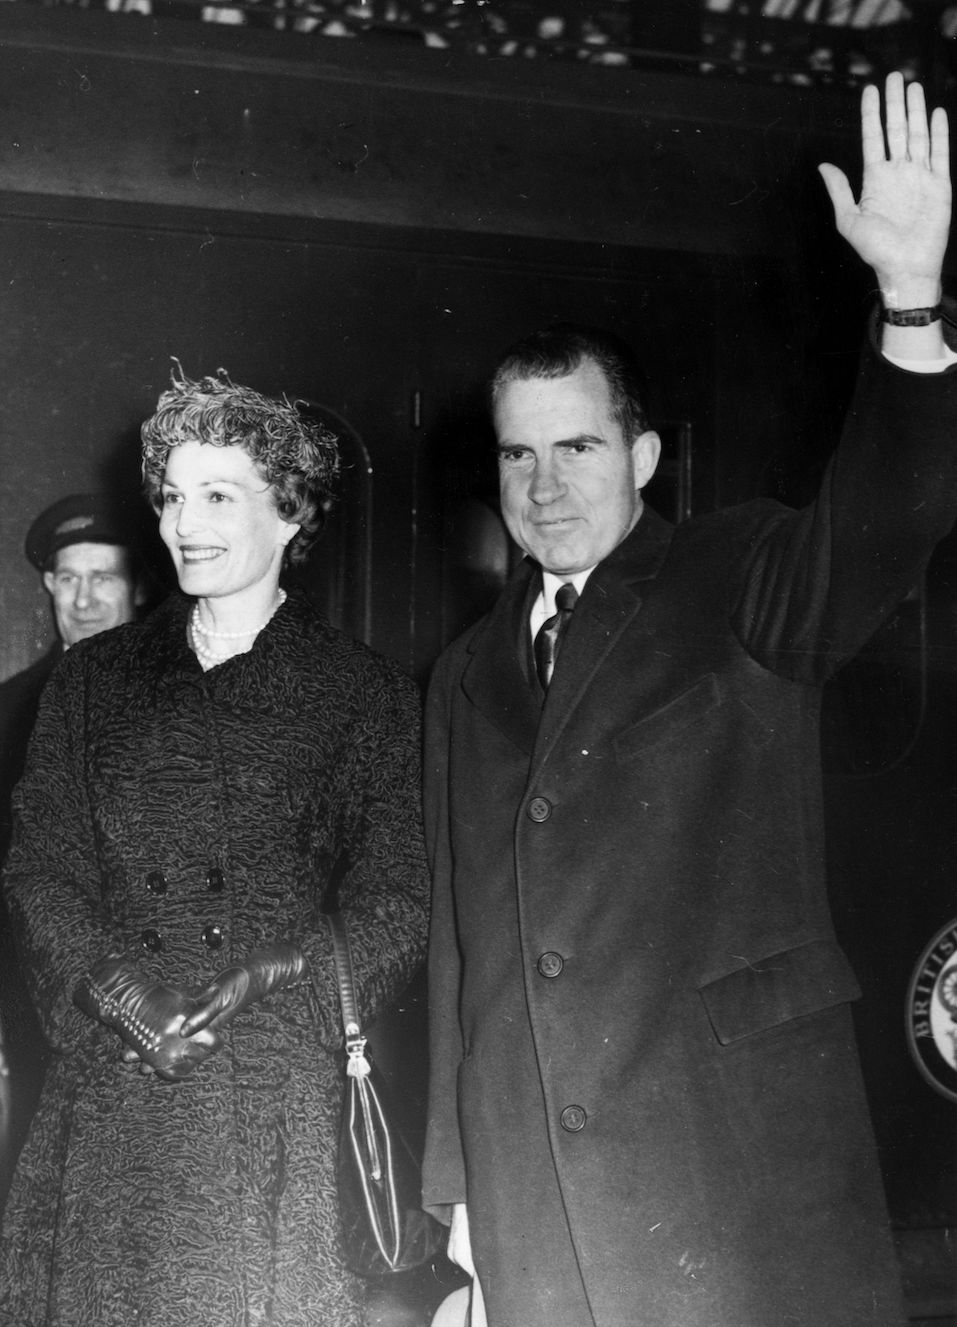 American Vice-President Richard Nixon and his wife Pat give a wave on their arrival at Victoria Station